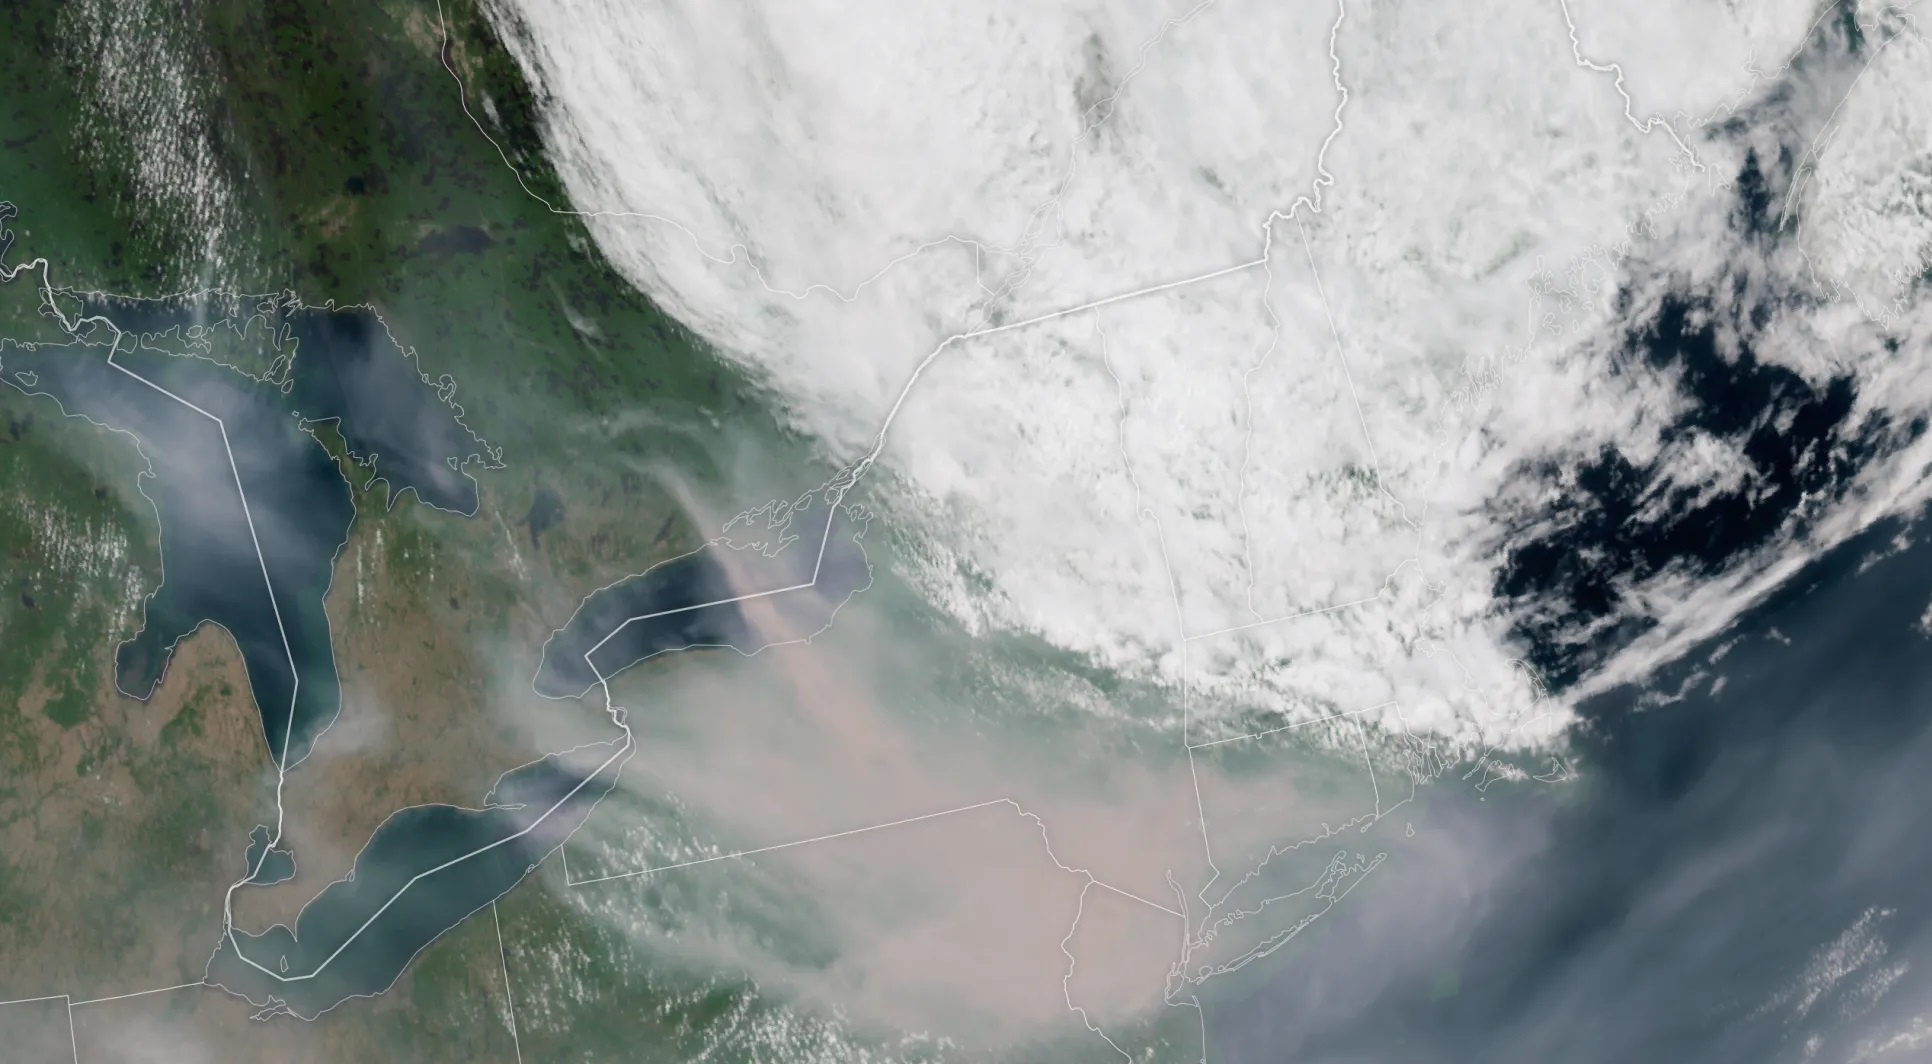 Smoke from the Canadian fires continues to affect millions in the Northeast US